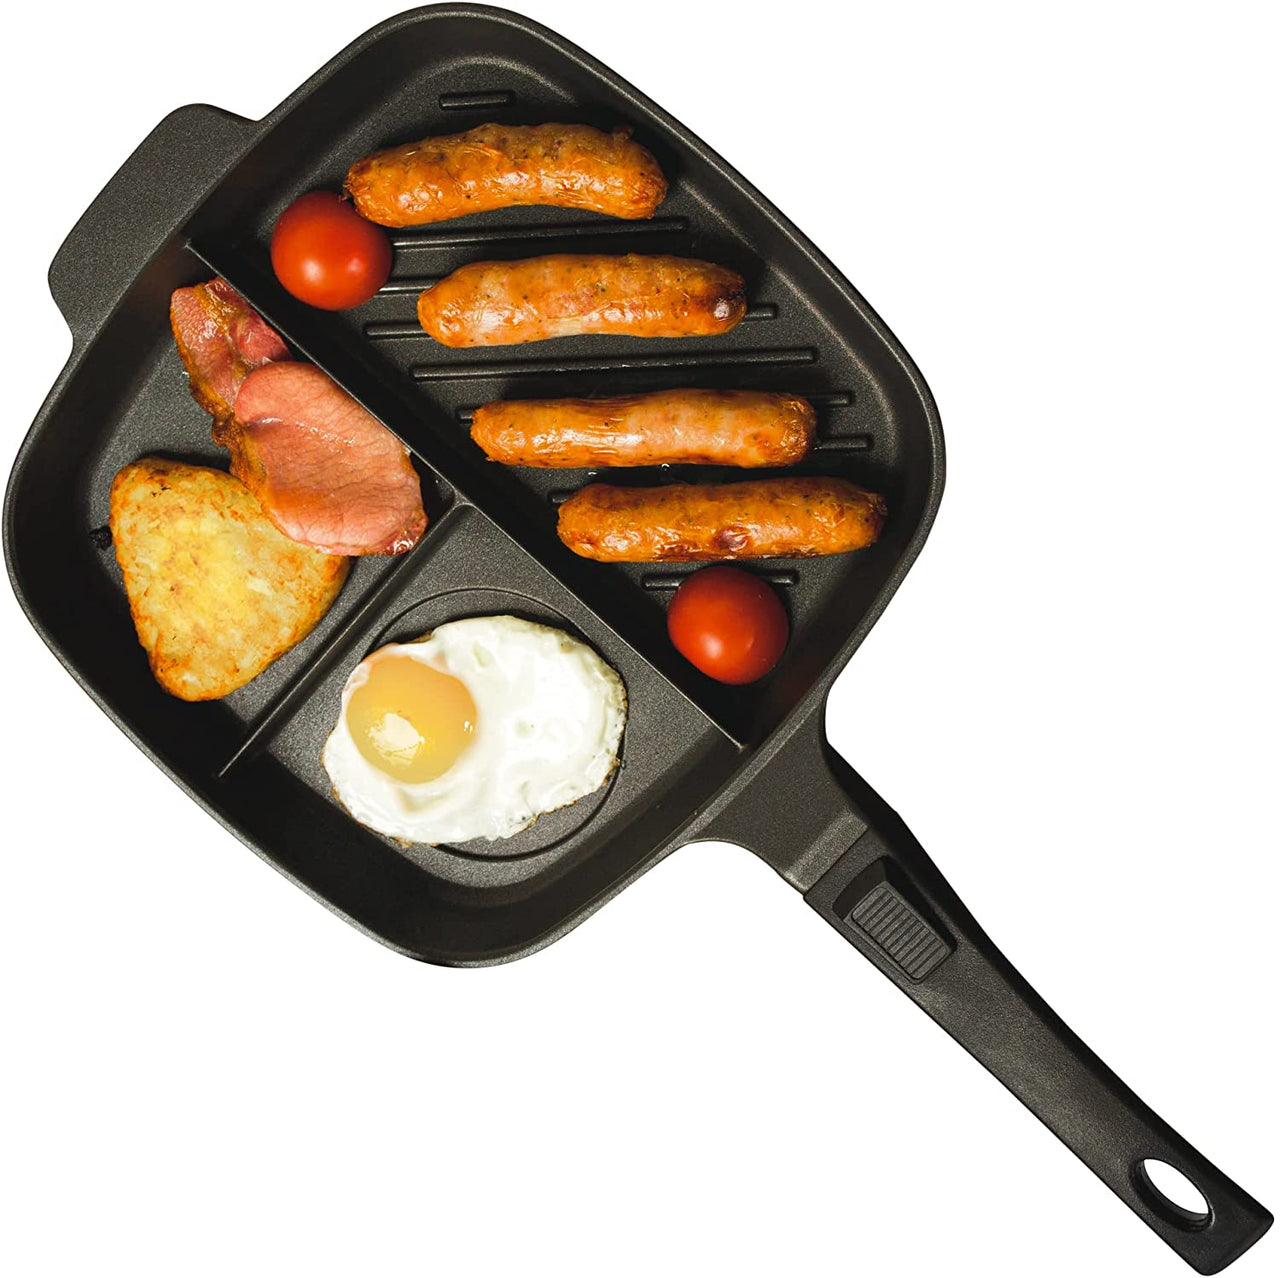  Master Pan Non-Stick Divided Grill/Fry/Oven Meal